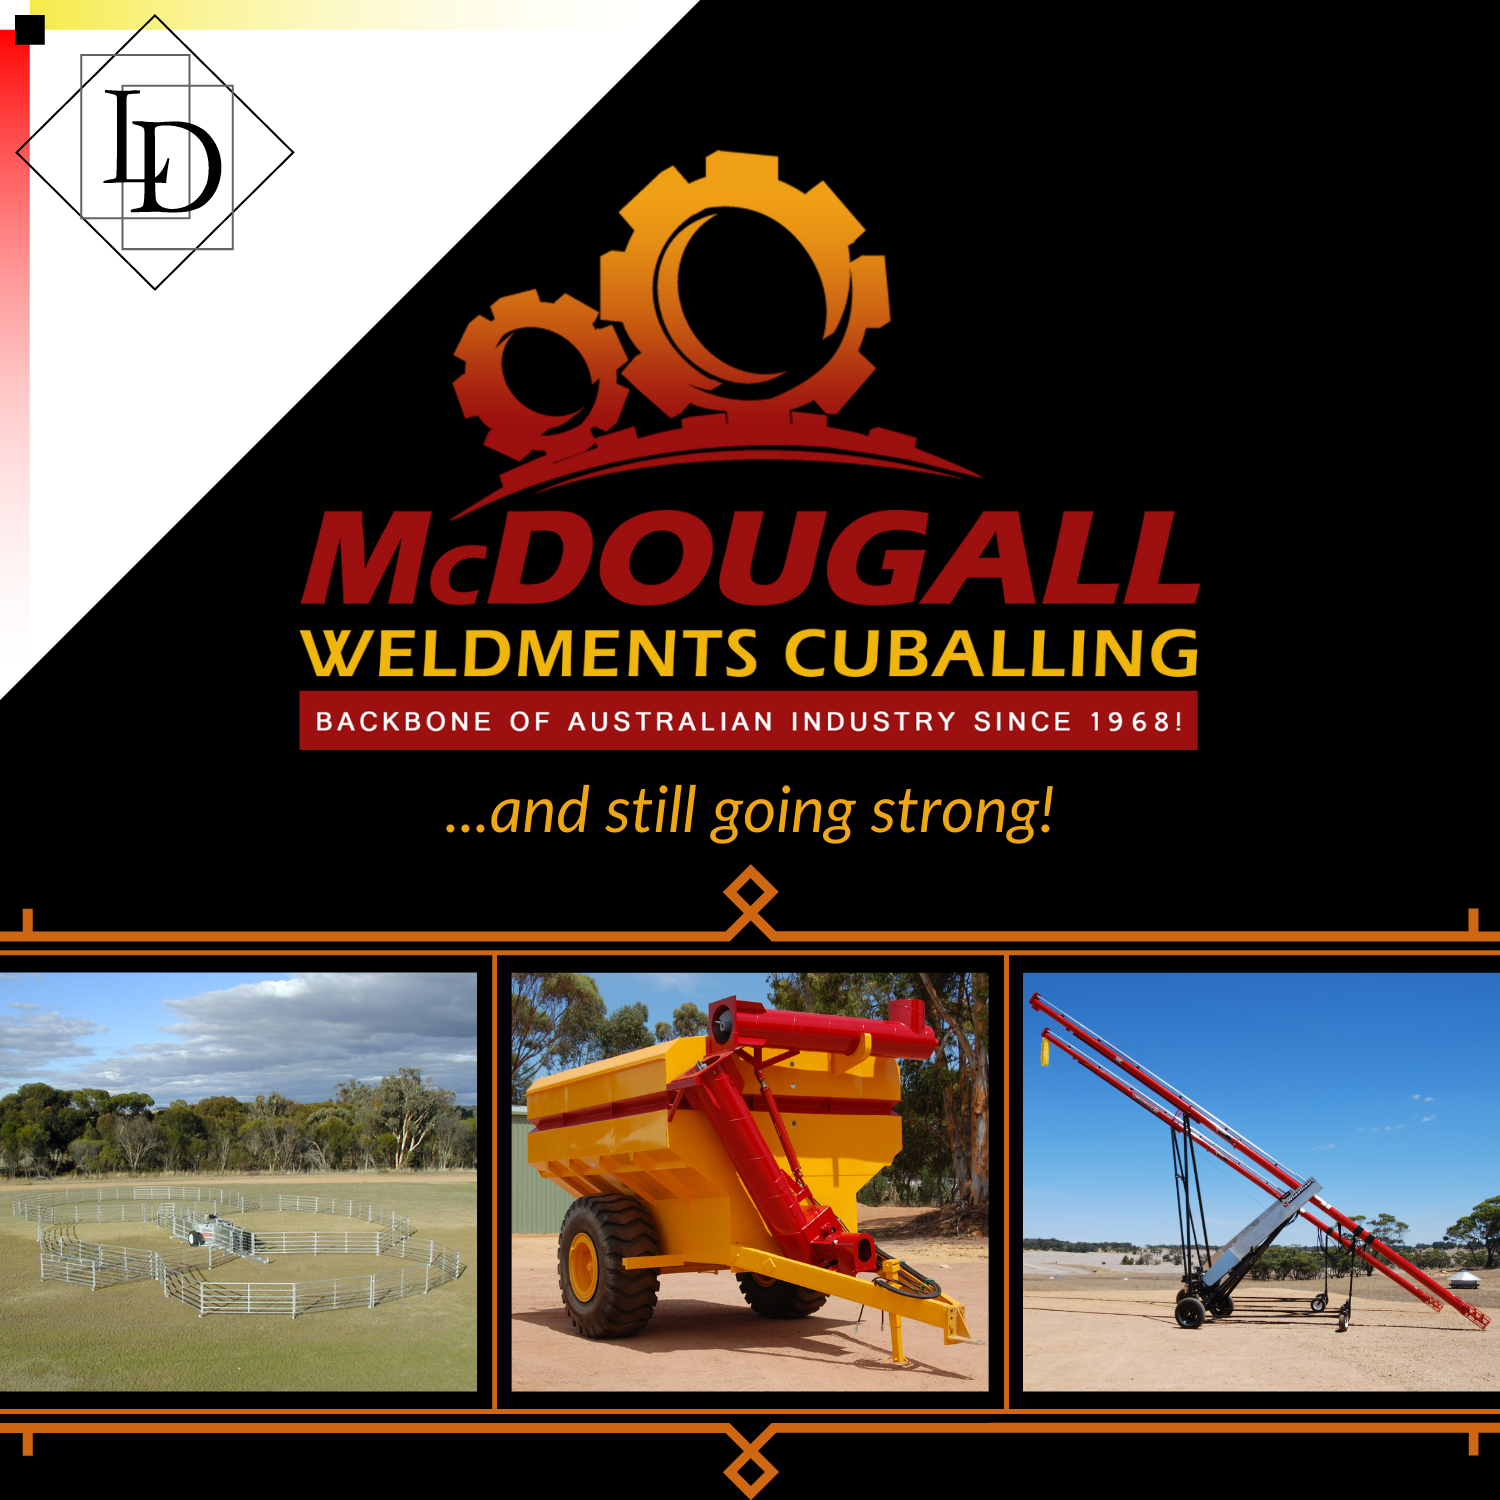 The image depicts the Logical Developments logo in the top left, and the McDougall Weldments logo in the upper centre along with it's slogan "Backbone of Australian Industry since 1968!". Immediately underneath, in the image centre, is a tag which reads "and still going strong!"
                In the lower half of the image, a stylised frame with three images is shown. The first image is of the McDougall Weldments mobile sheepyards, the second of a chaser bin, and the third is of an auger.